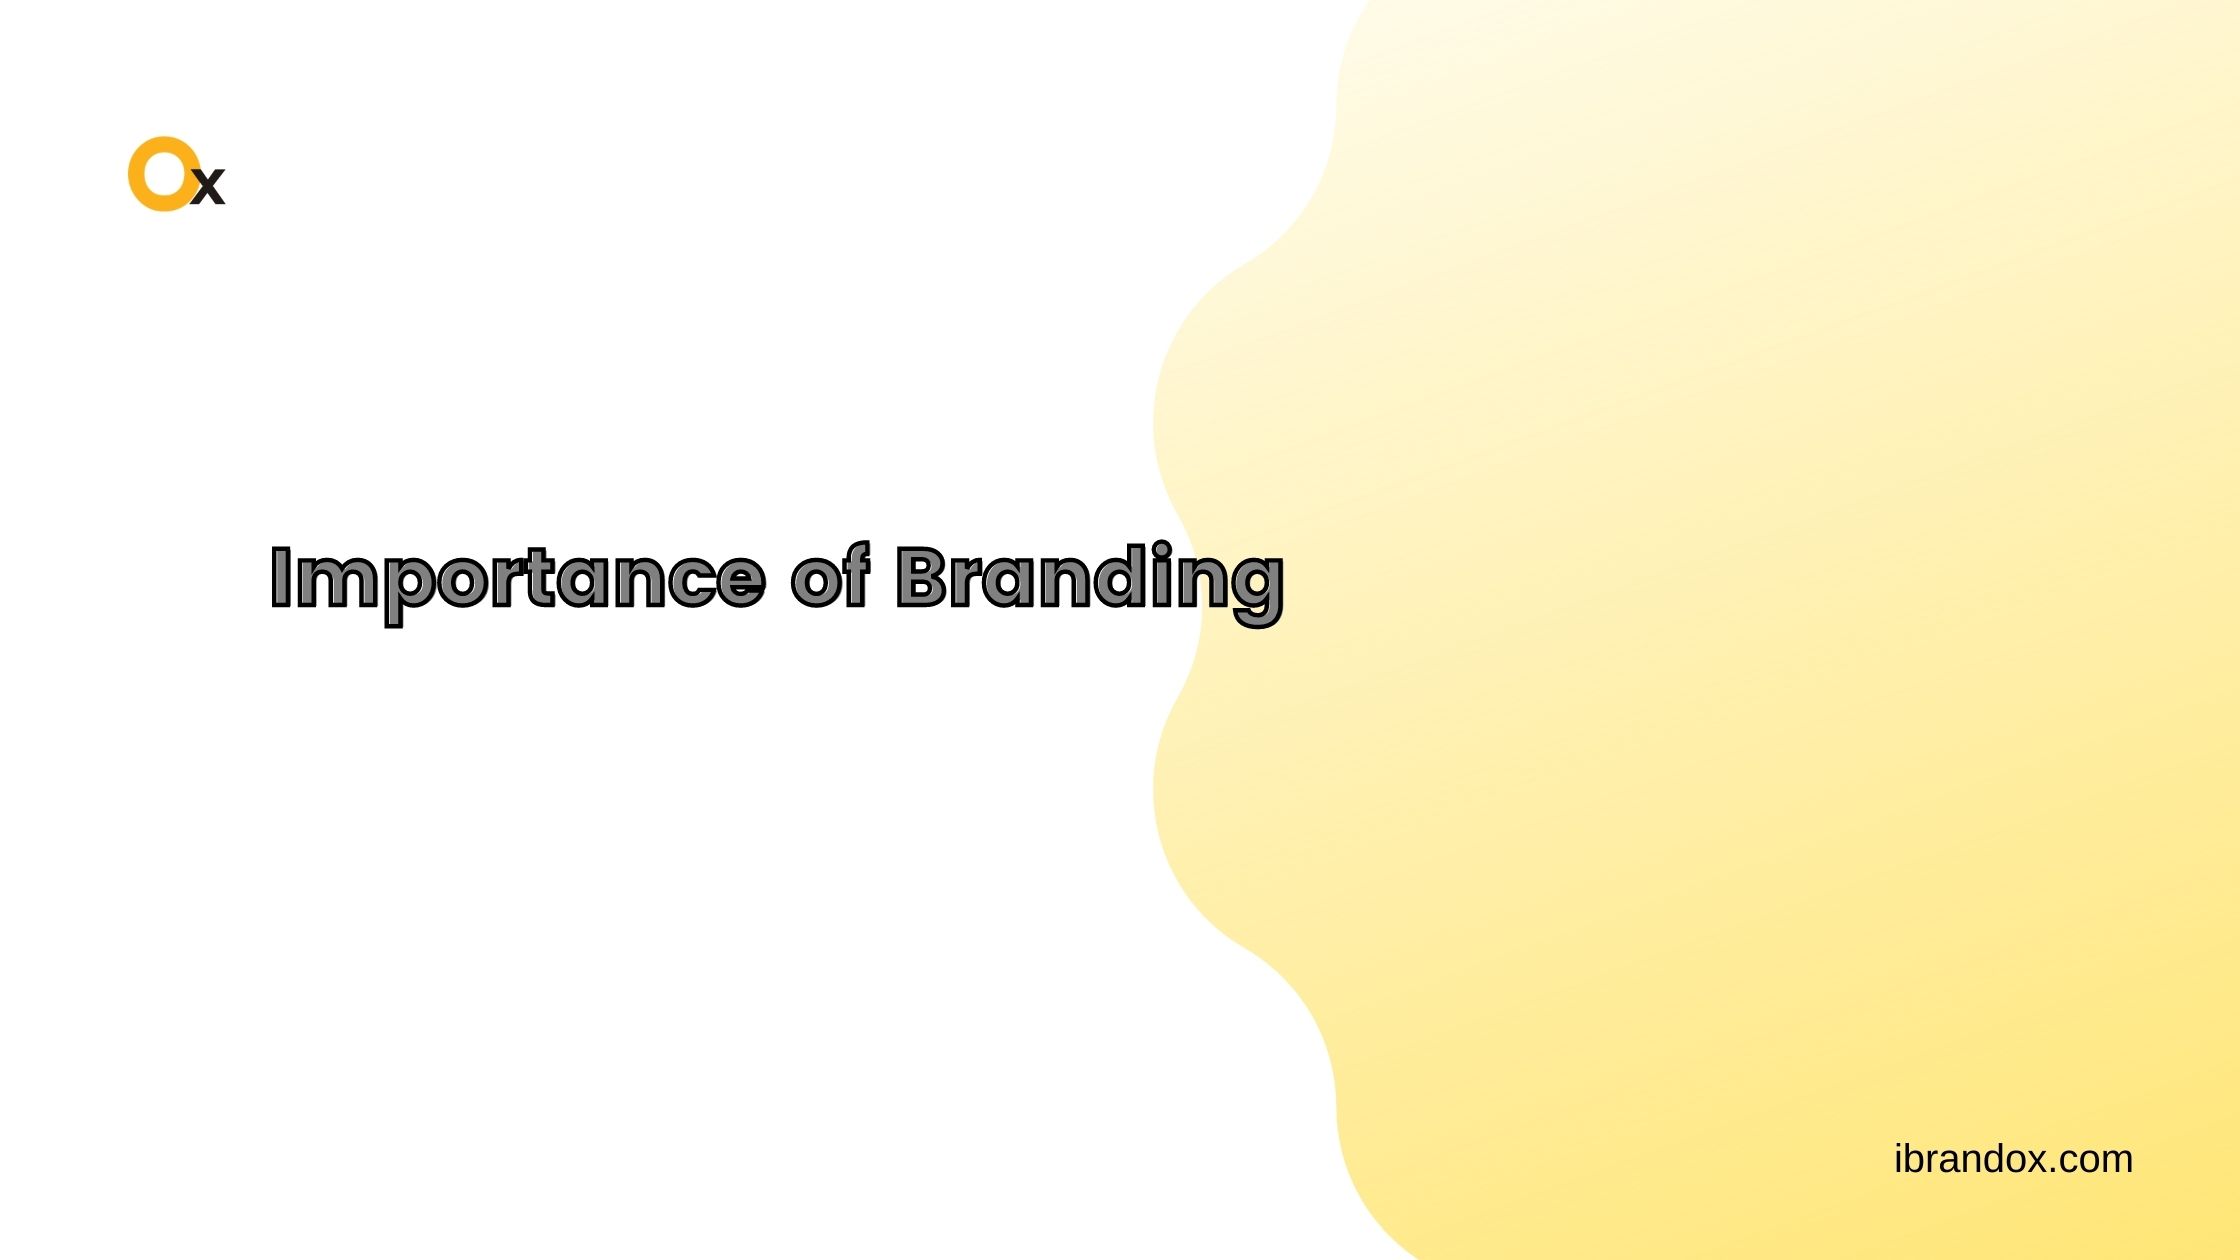 Article about Importance of Branding Company in India